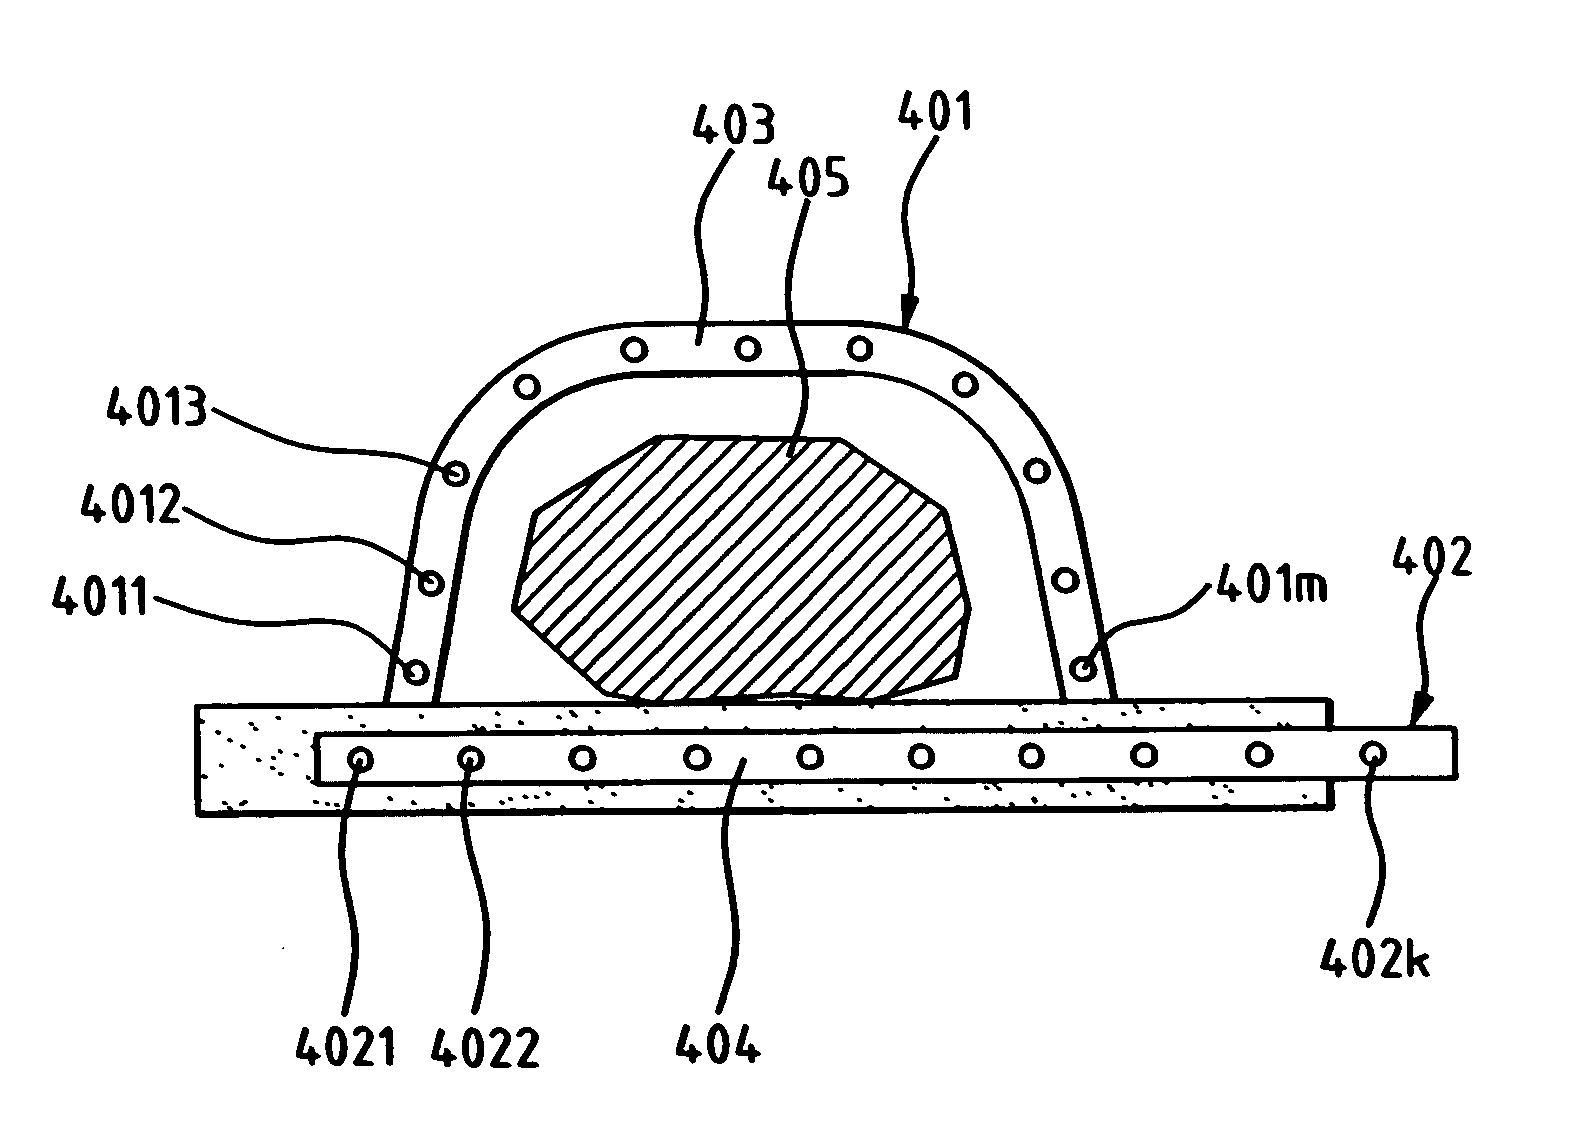 Scatter correction device for radiative tomographic scanner